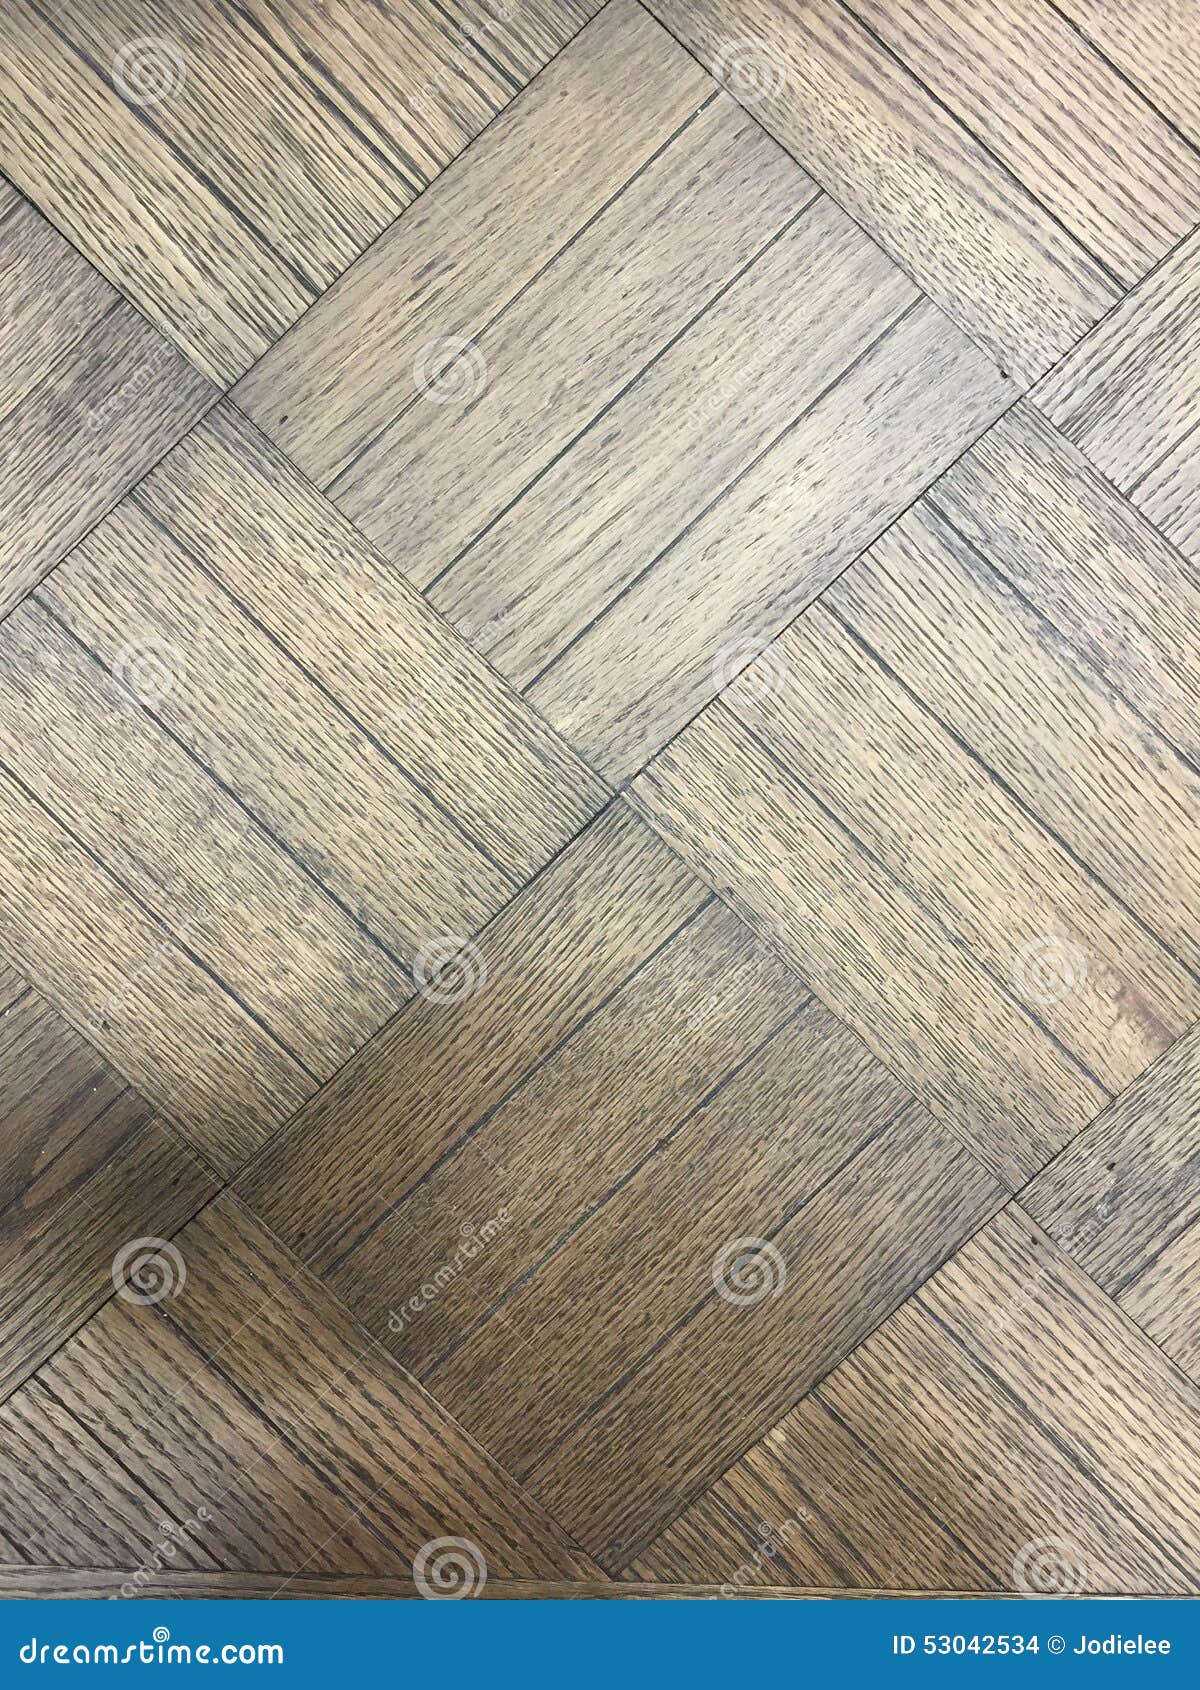 Grungy Distressed Wooden Flooring Texture With White Paint Stock